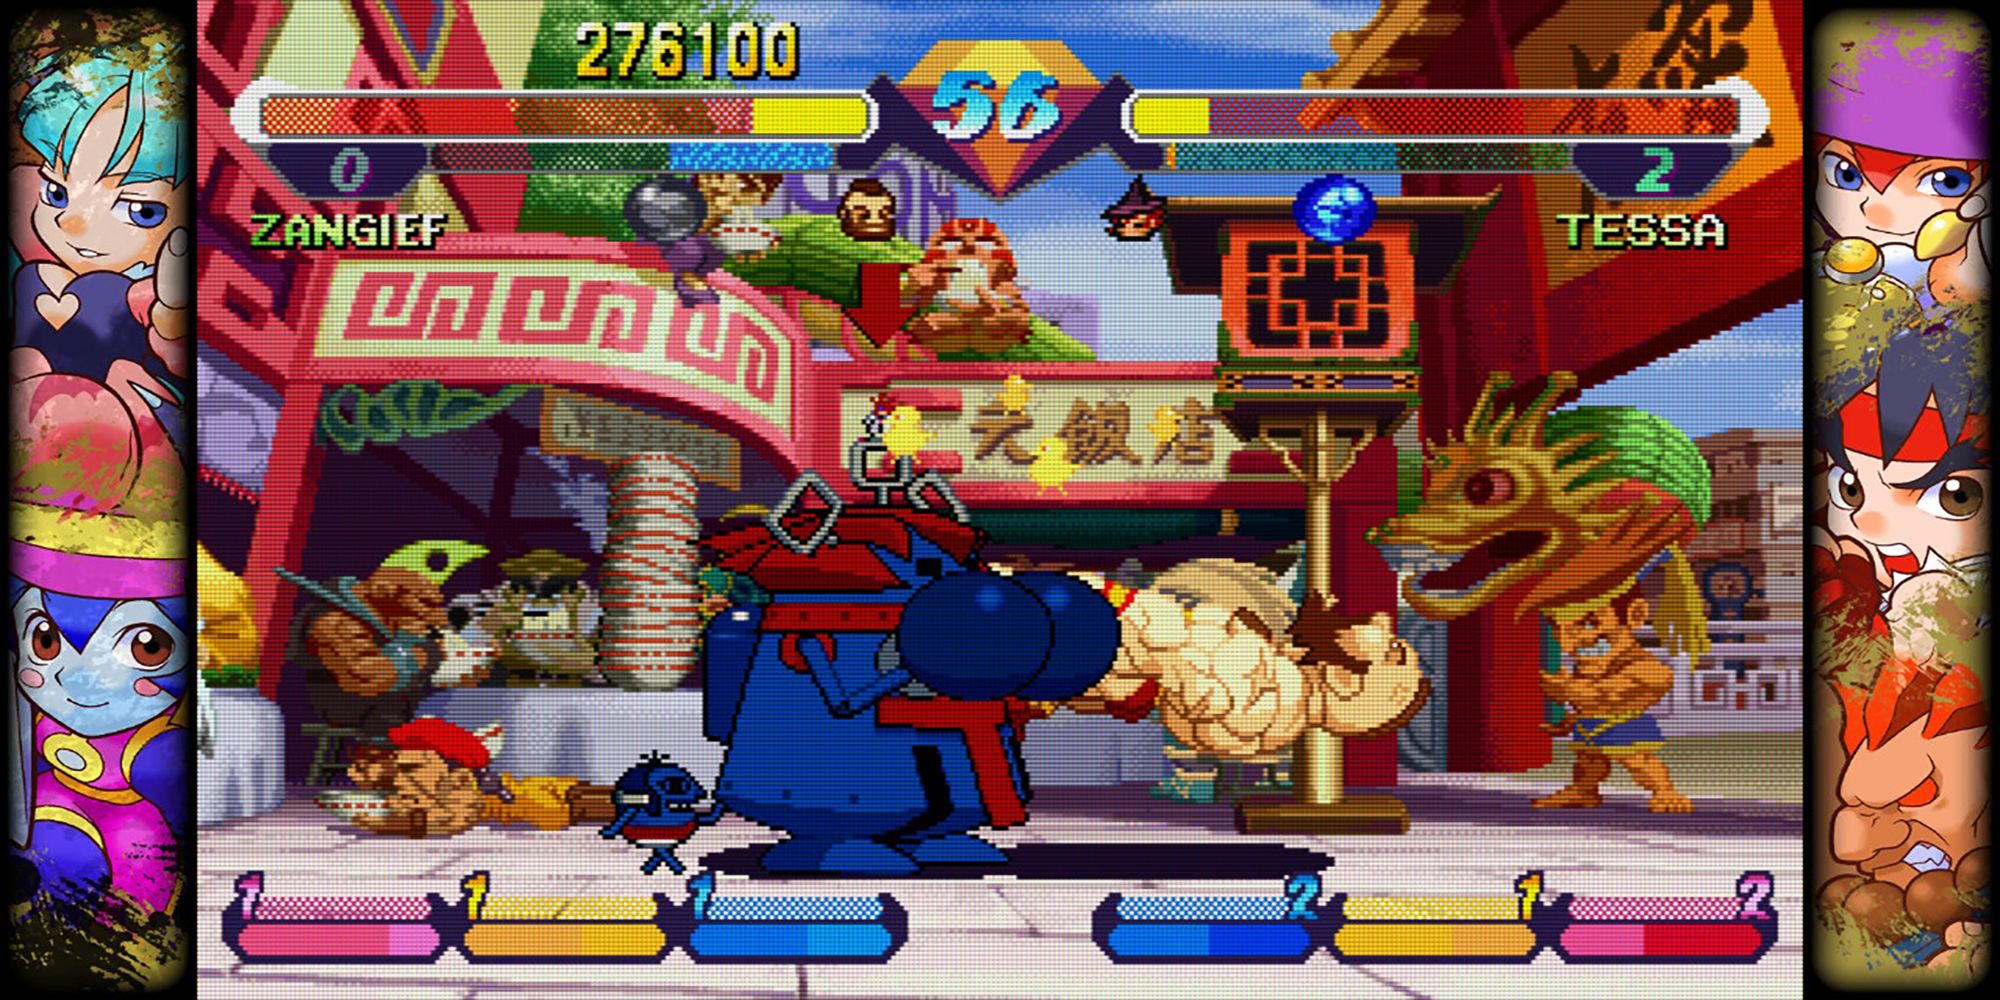 Tessa changes into a robot costume during a flash combo against Zangief in Chinatown in Pocket Fighter, a game in Capcom Fighting Collection.